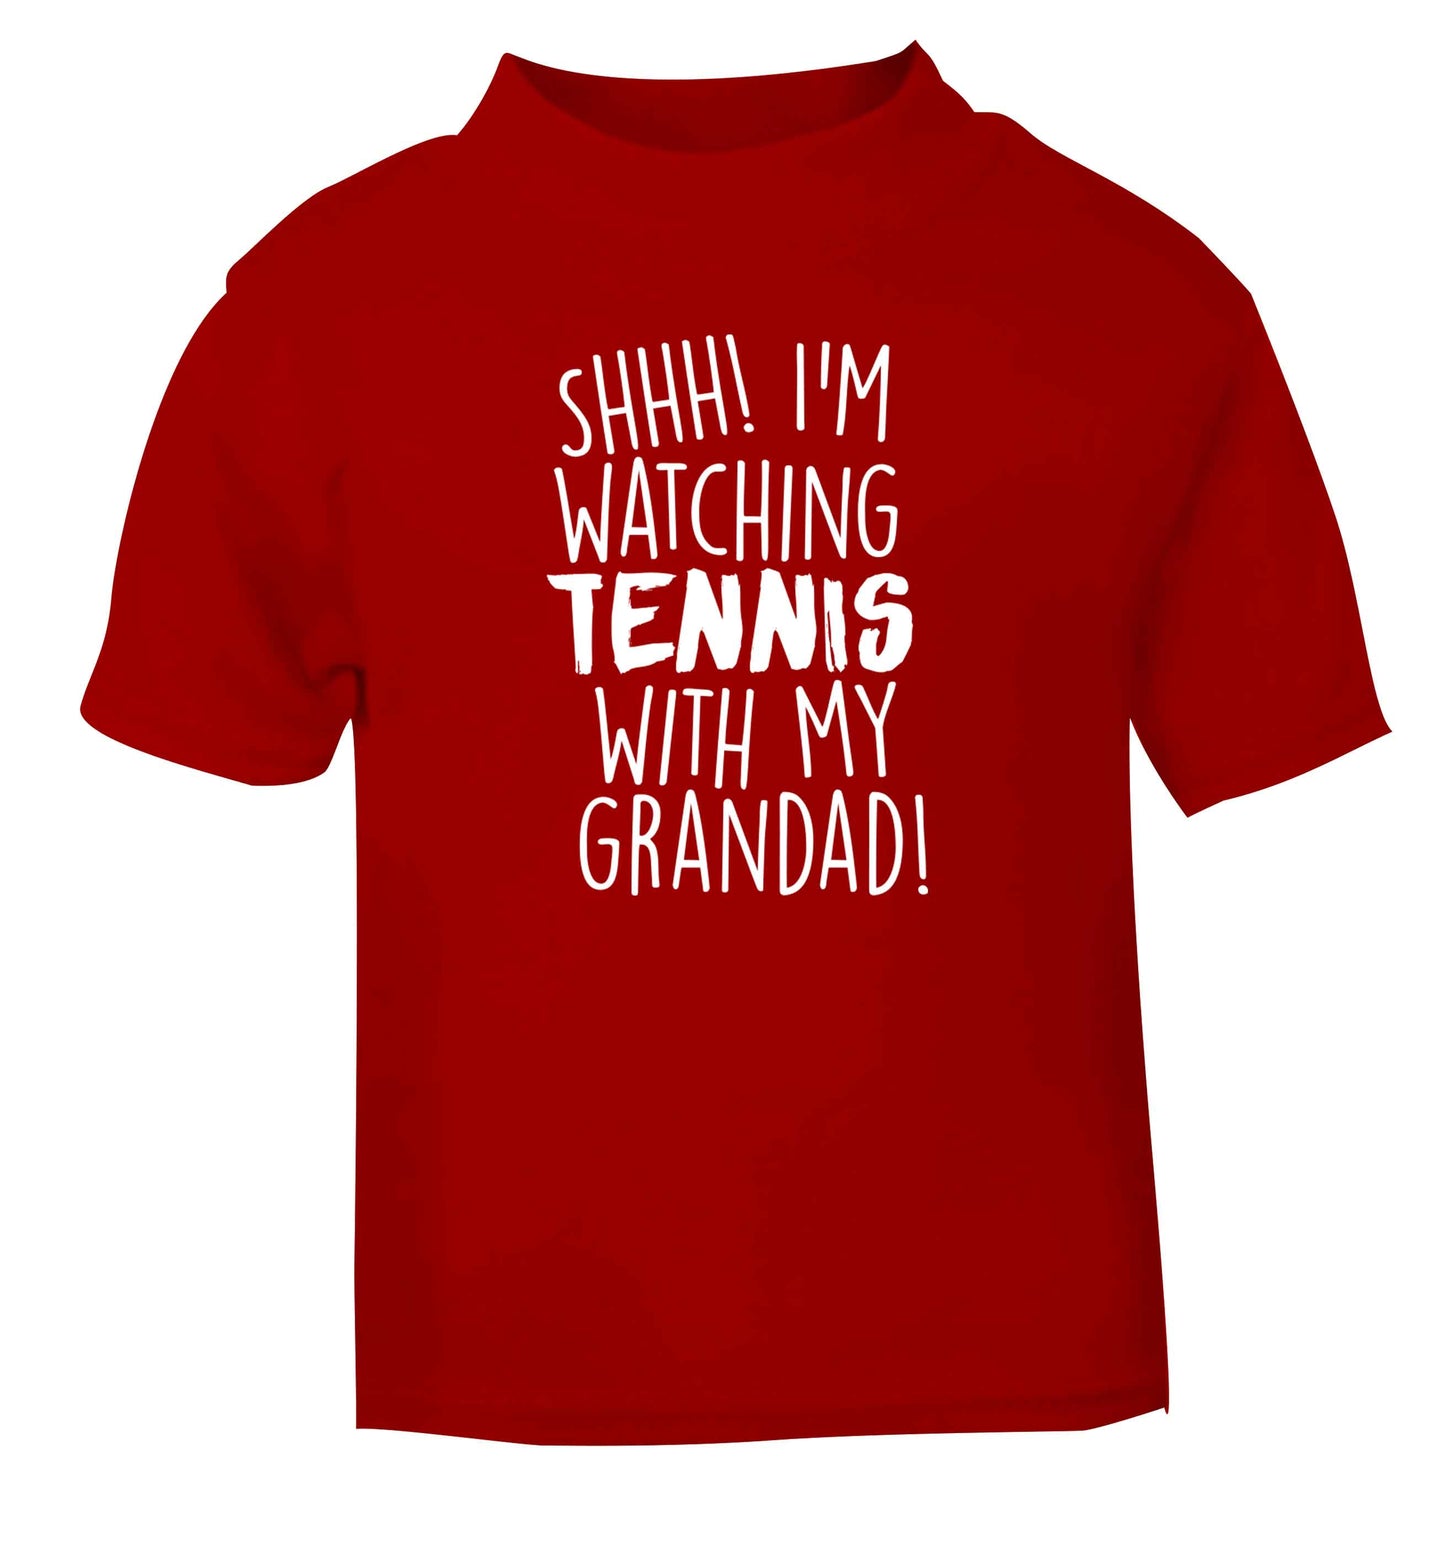 Shh! I'm watching tennis with my grandad! red Baby Toddler Tshirt 2 Years